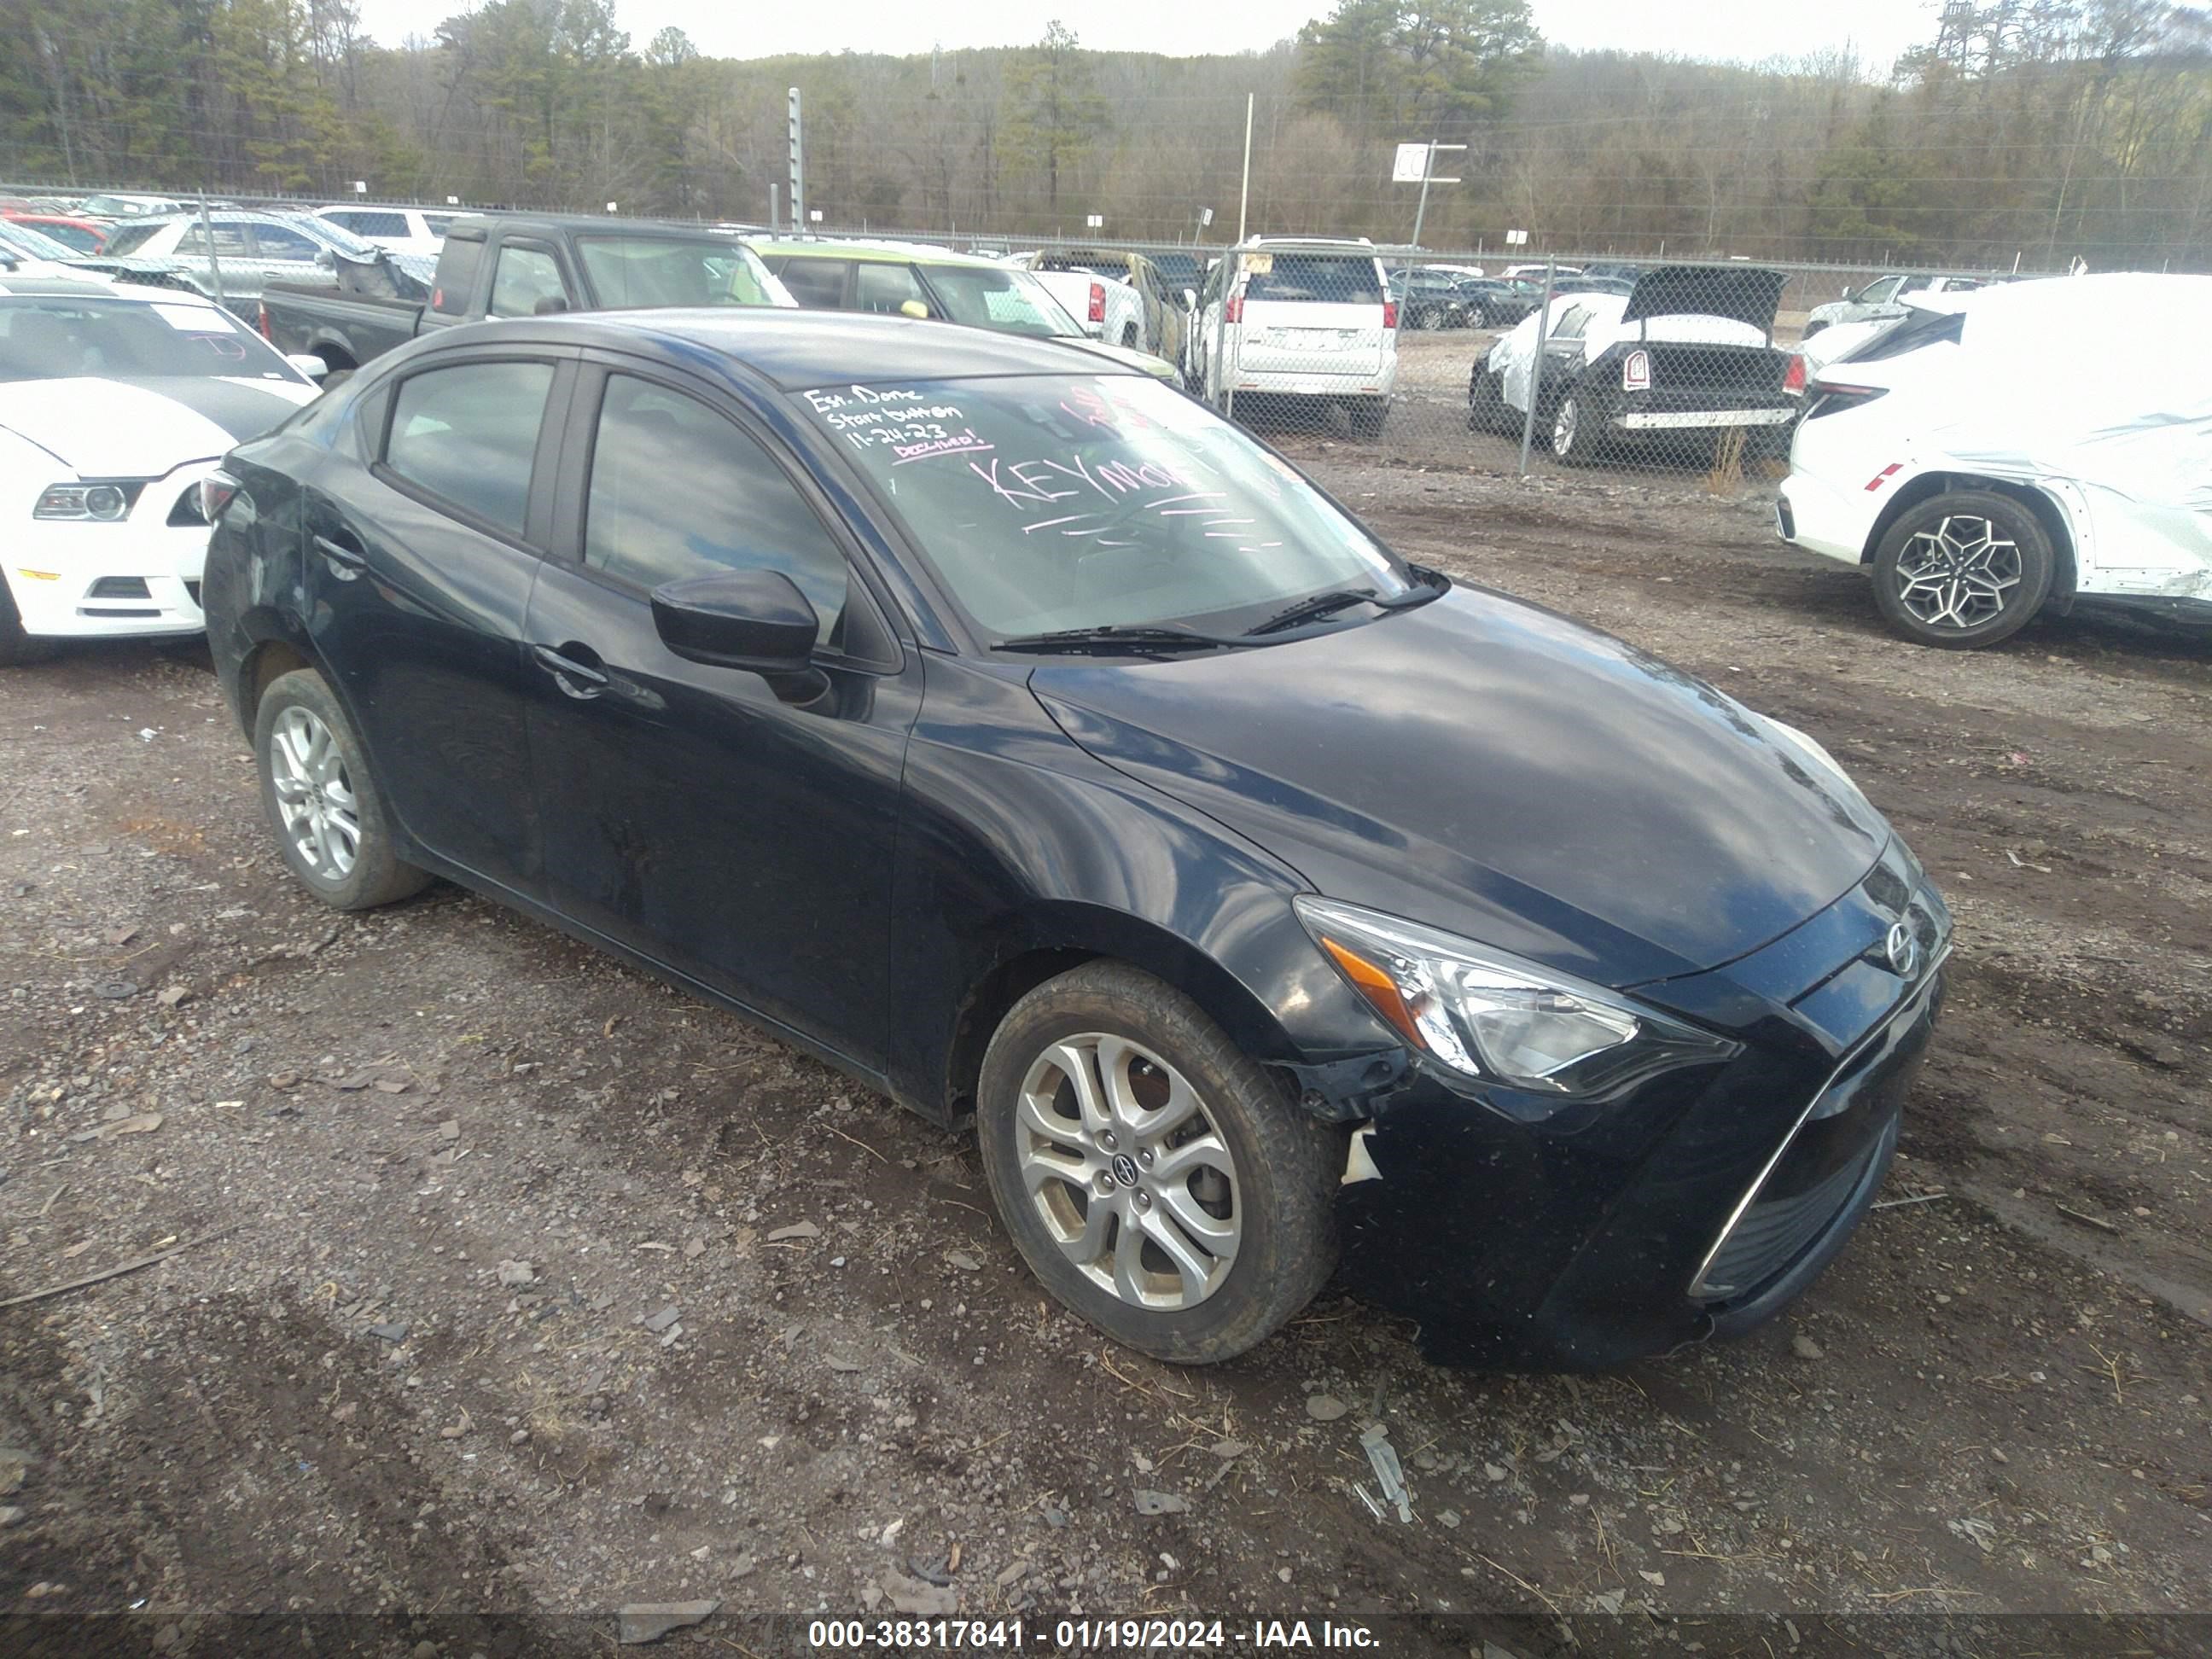 vin: 3MYDLBZV2GY104042 3MYDLBZV2GY104042 2016 scion ia 1500 for Sale in 35022, 1600 Highway 150, Bessemer, Alabama, USA